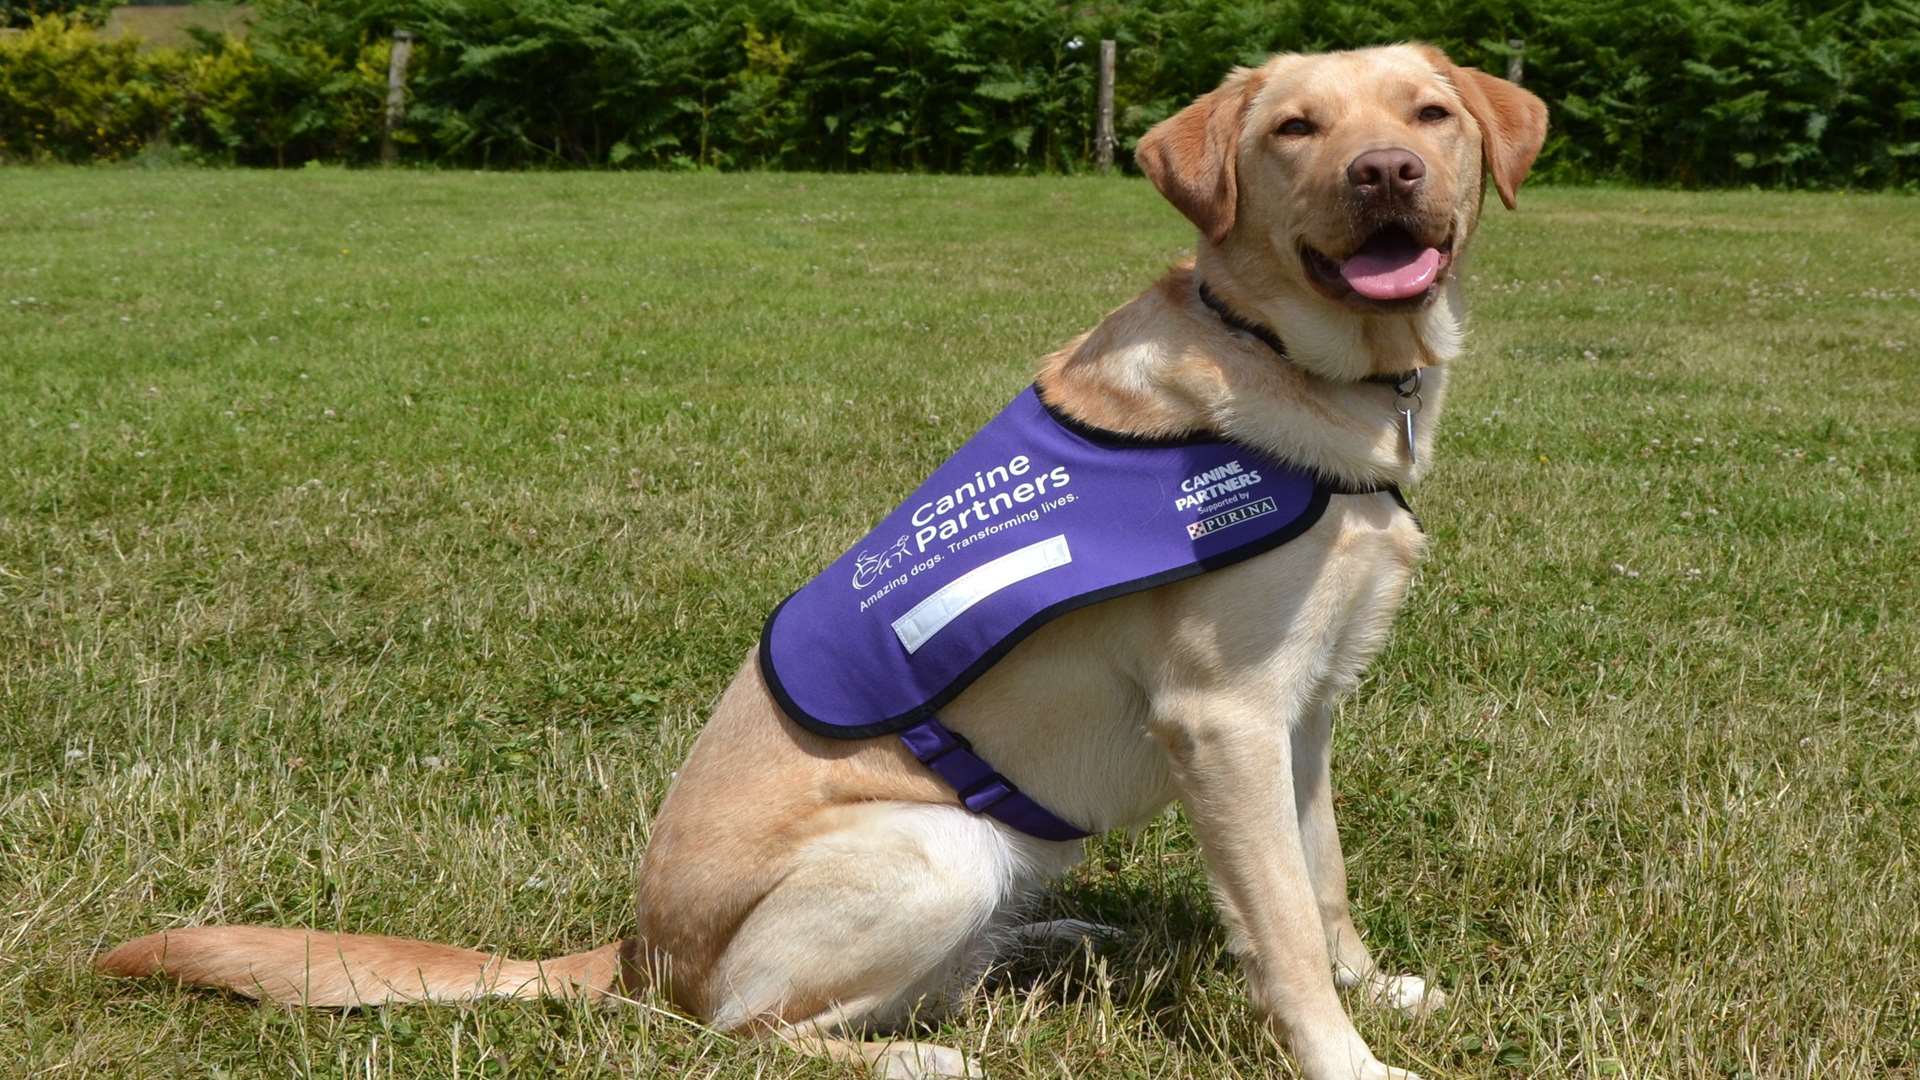 Ola the labrador gives owner Nicola vital support in living with multiple sclerosis.